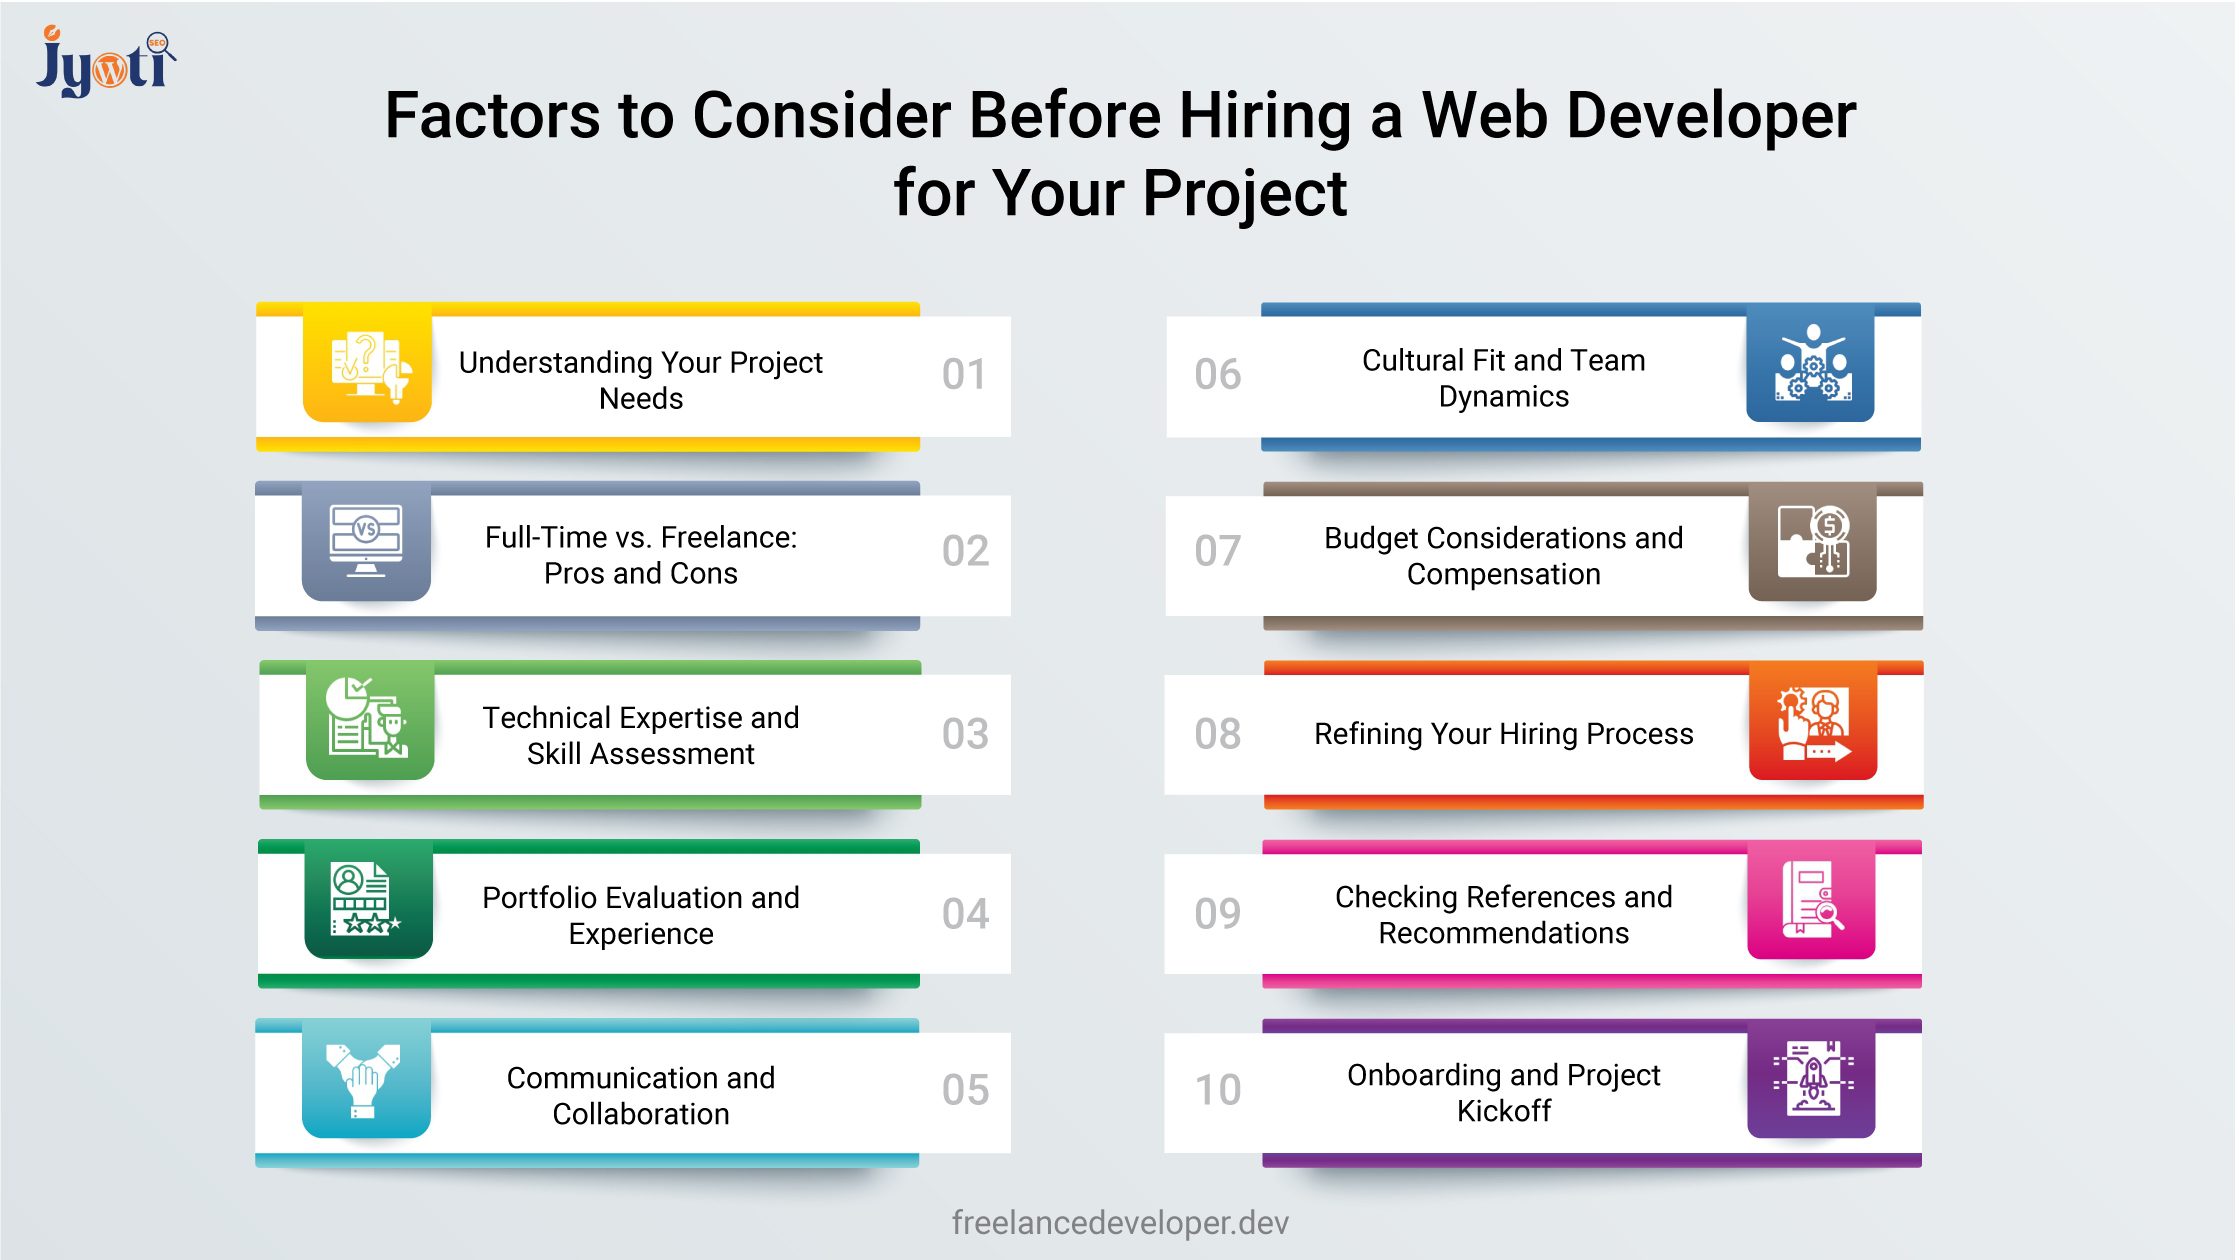 Unlocking Success: How to Hire the Perfect Web Developer for Your Project